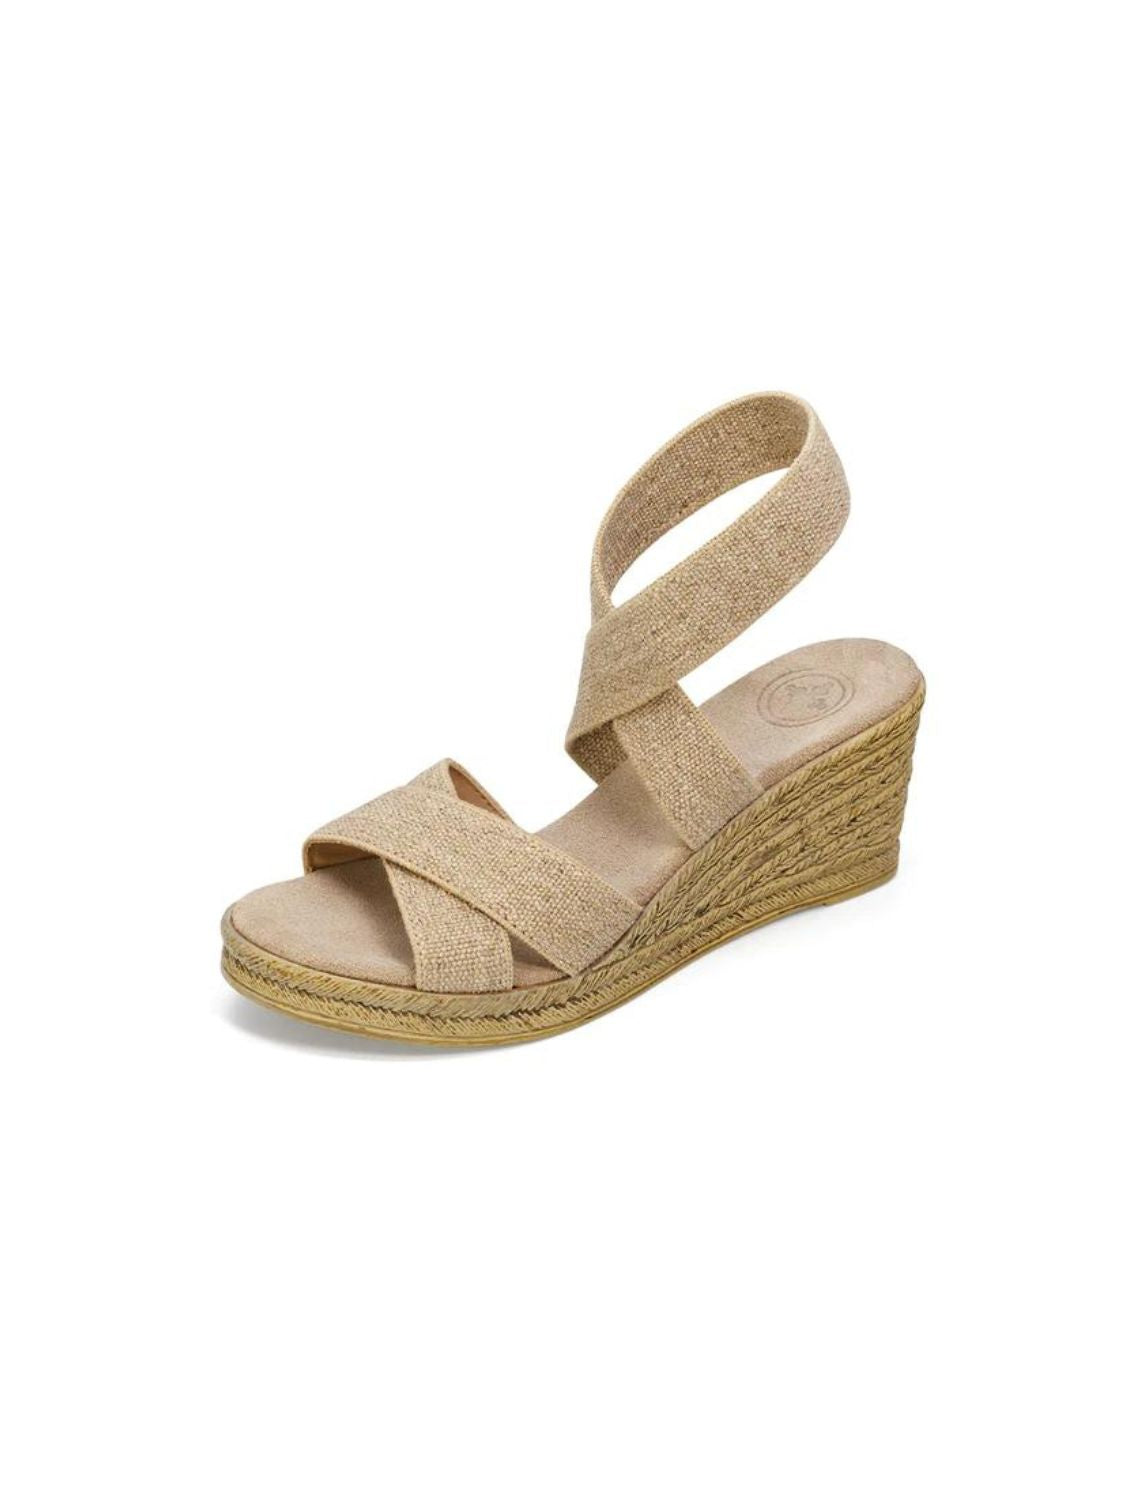 charleston shoe company fishburne cross strap wedge in line-front view